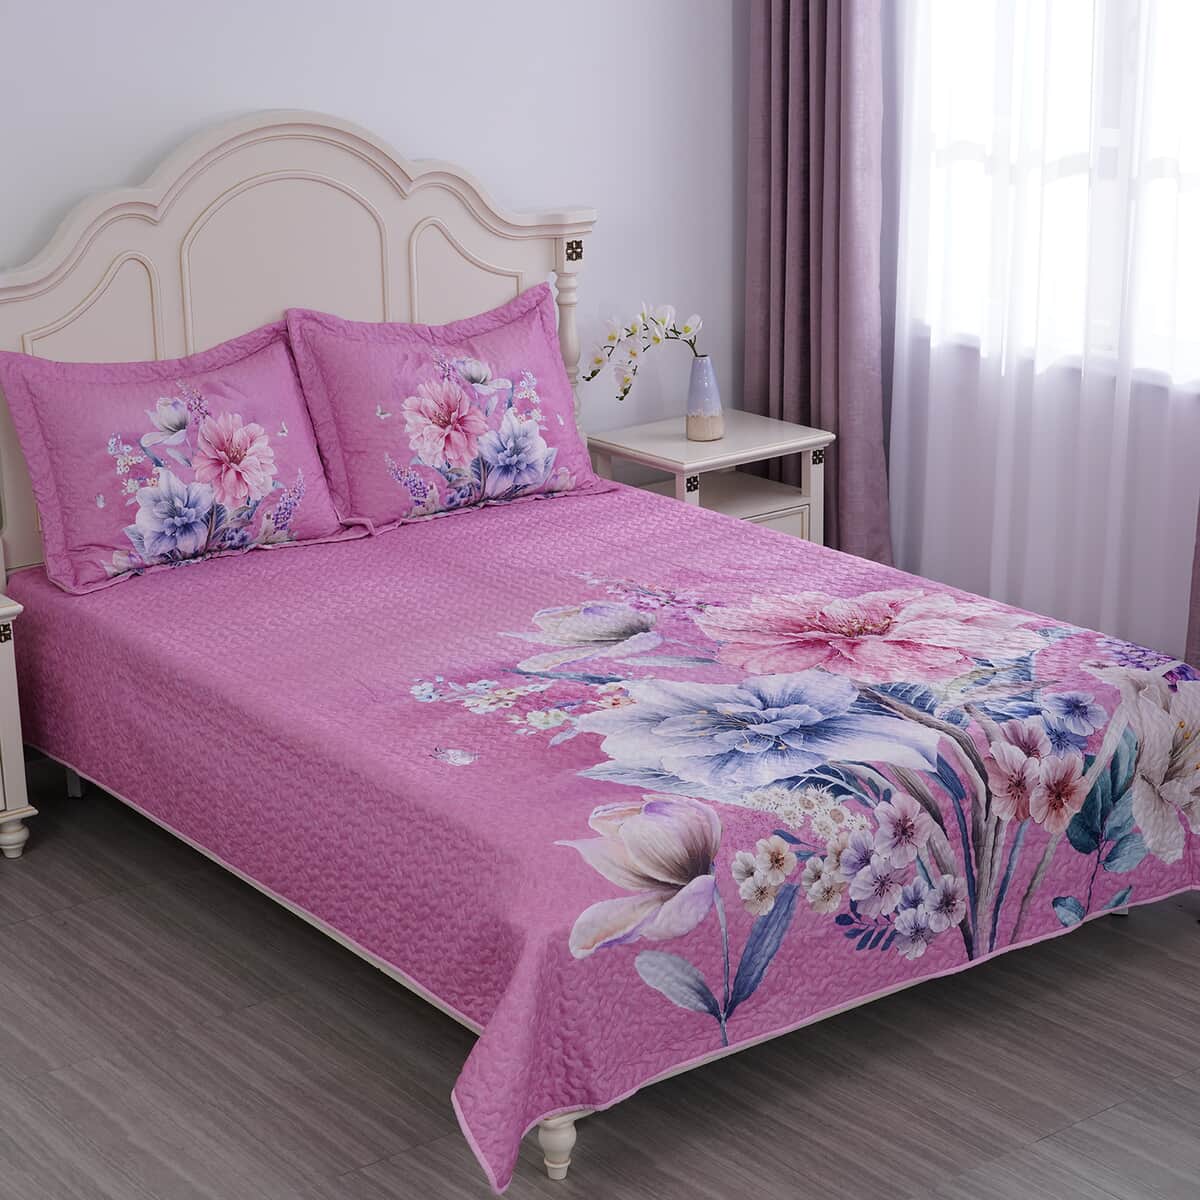 Homesmart Pink Floral Digital Print 100% Microfiber Quilted Bedspread and 2 Pillow Shams - Queen image number 0